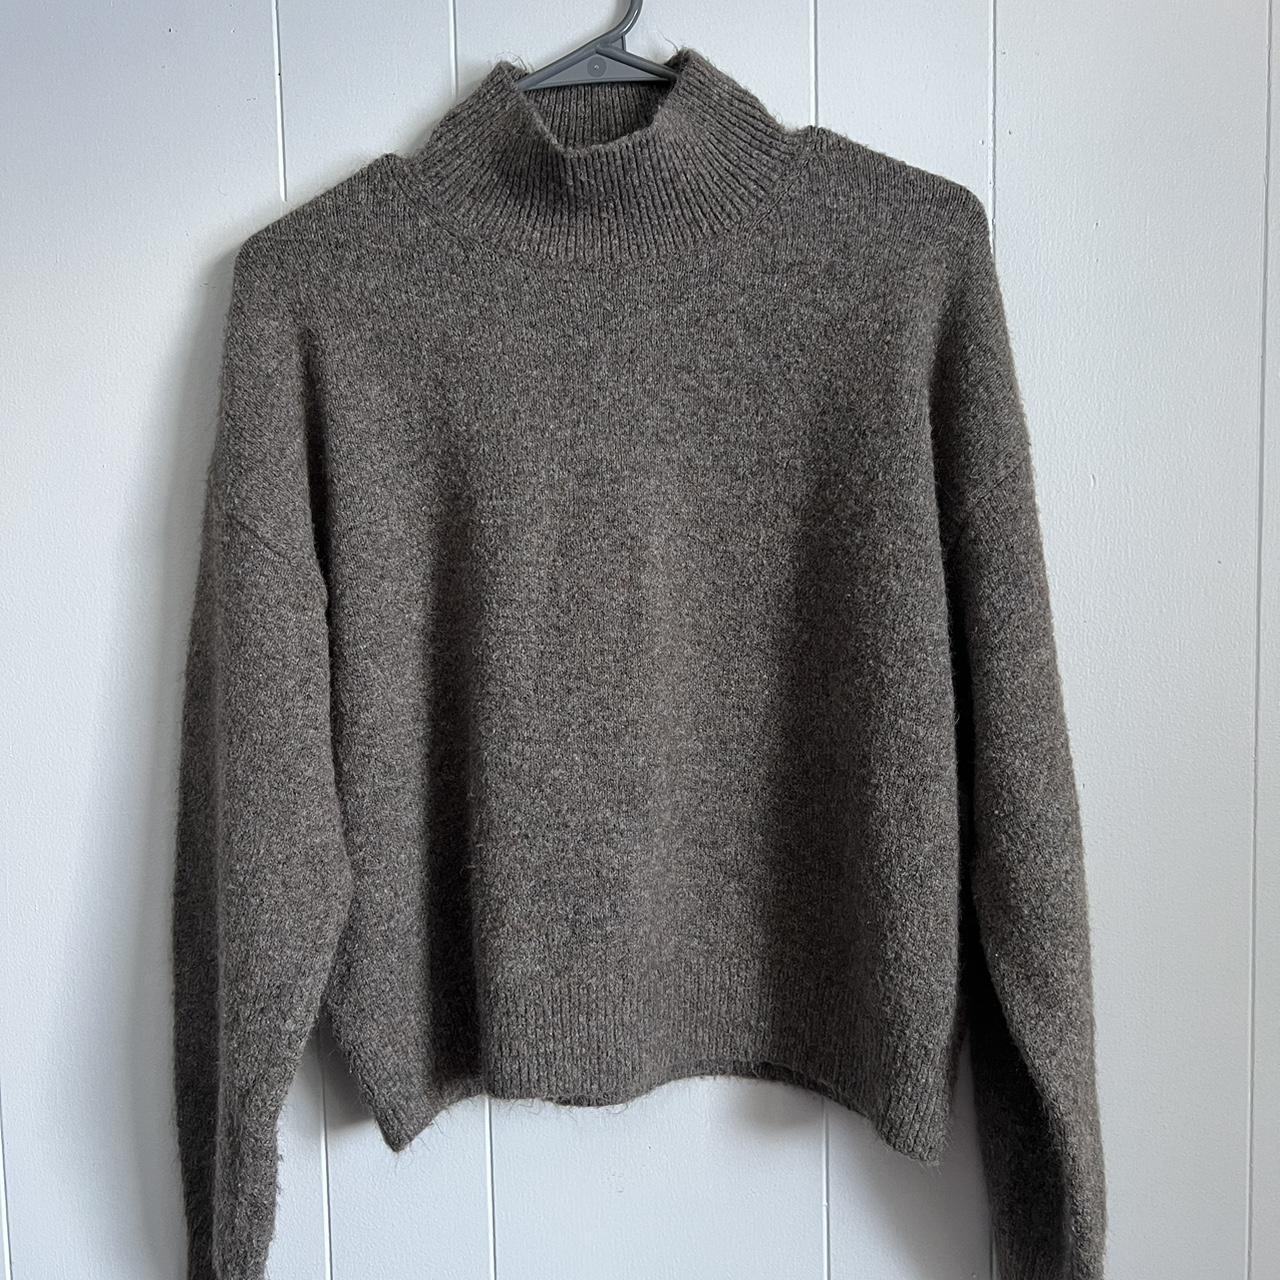 Soft mock neck sweater from H&M— perfect staple... - Depop